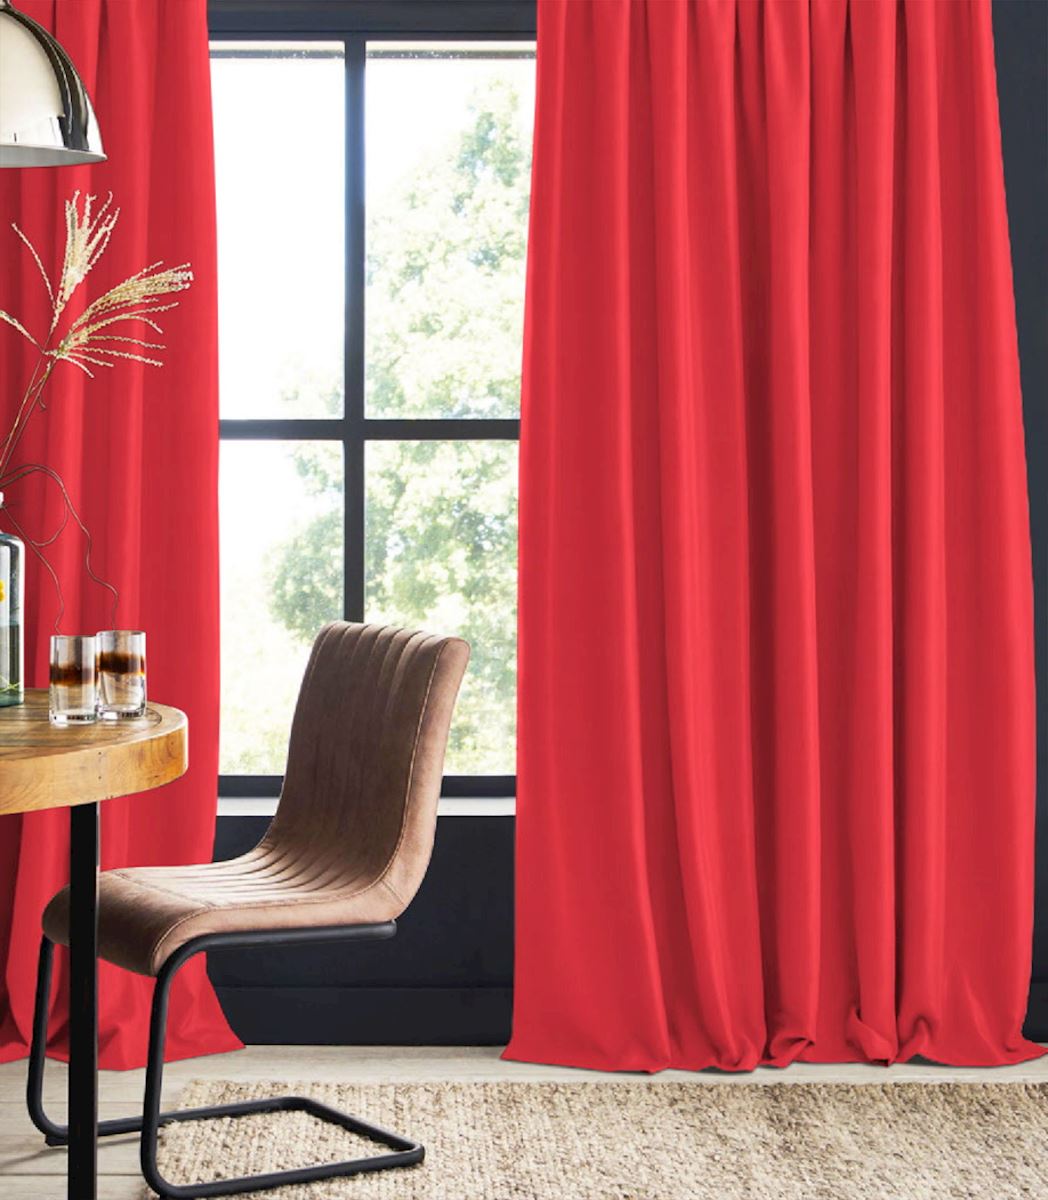 Blackout curtain tomato red Corin